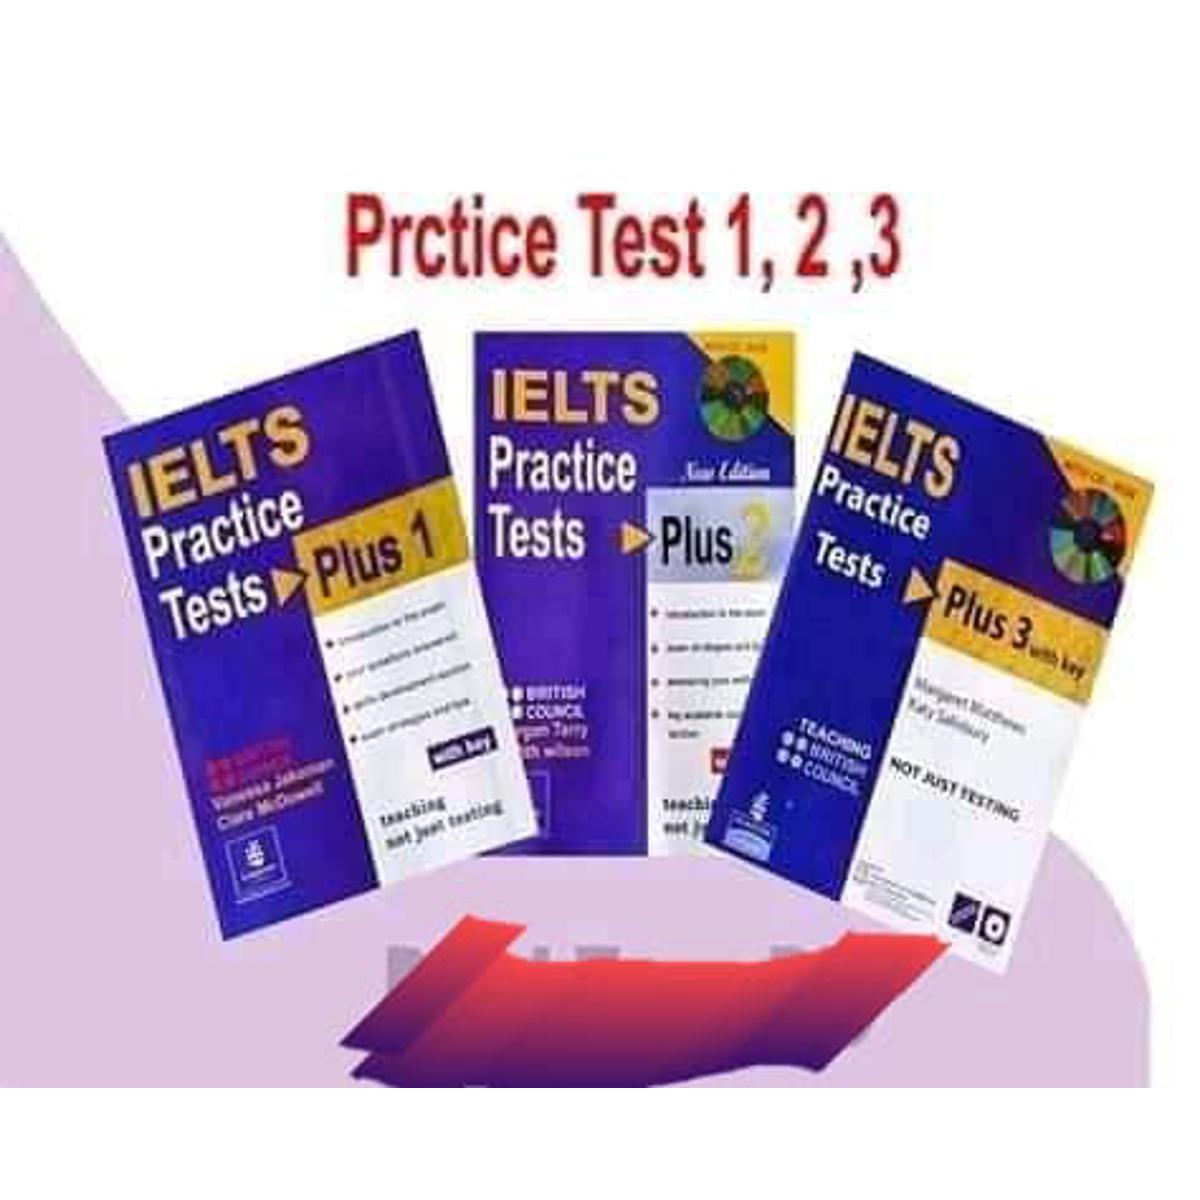 IELTS Practice Tests Plus 1,2,3 With DVD